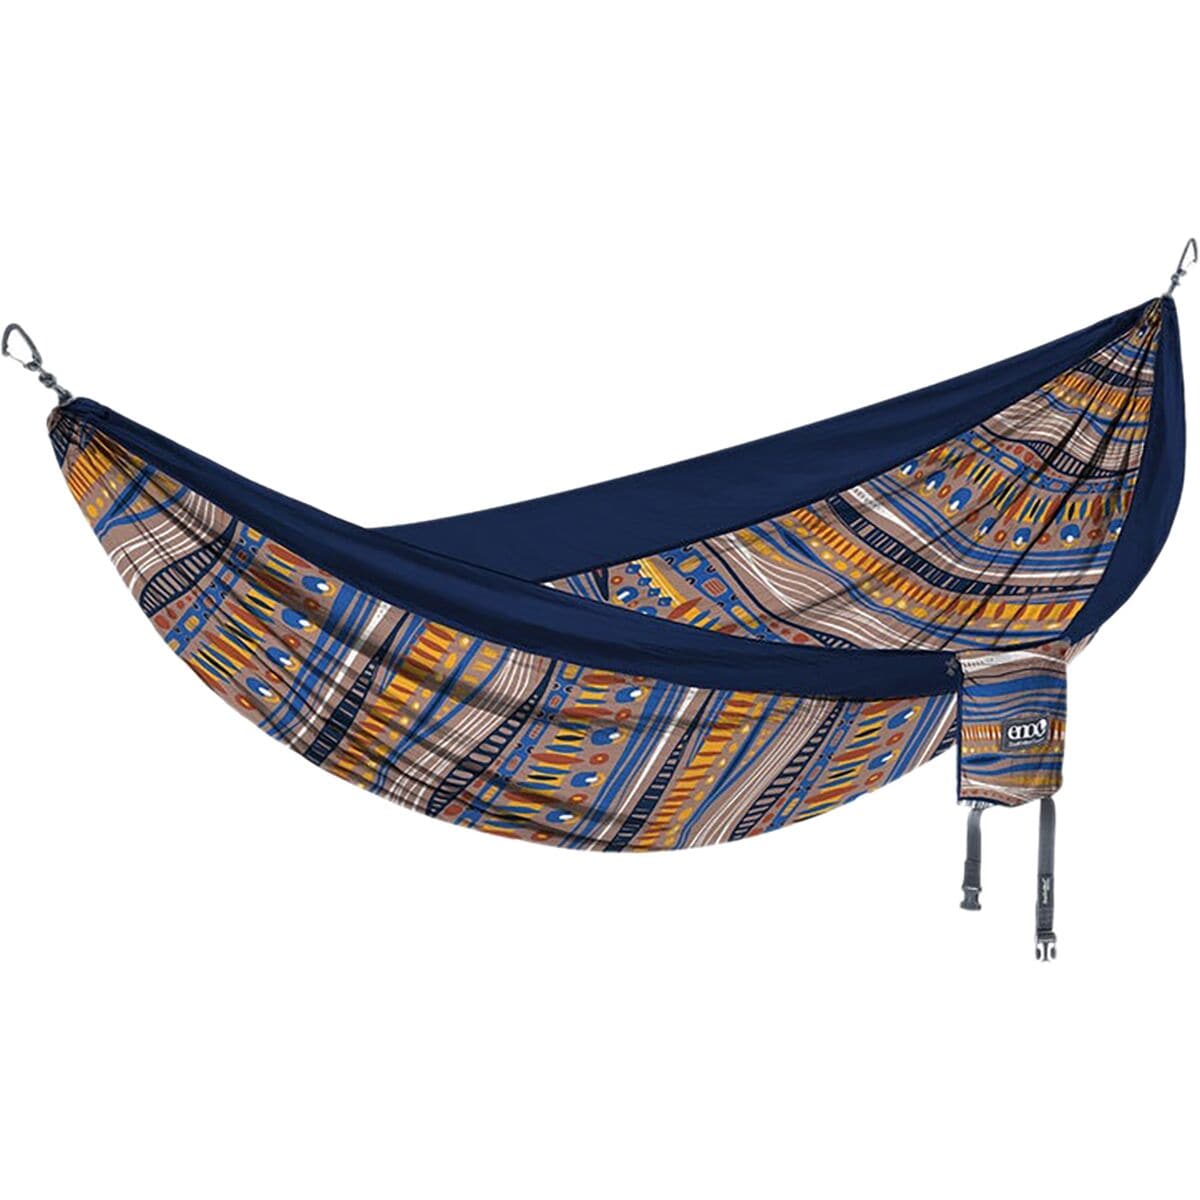 Photos - Other goods for tourism ENO DoubleNest Print Hammock 